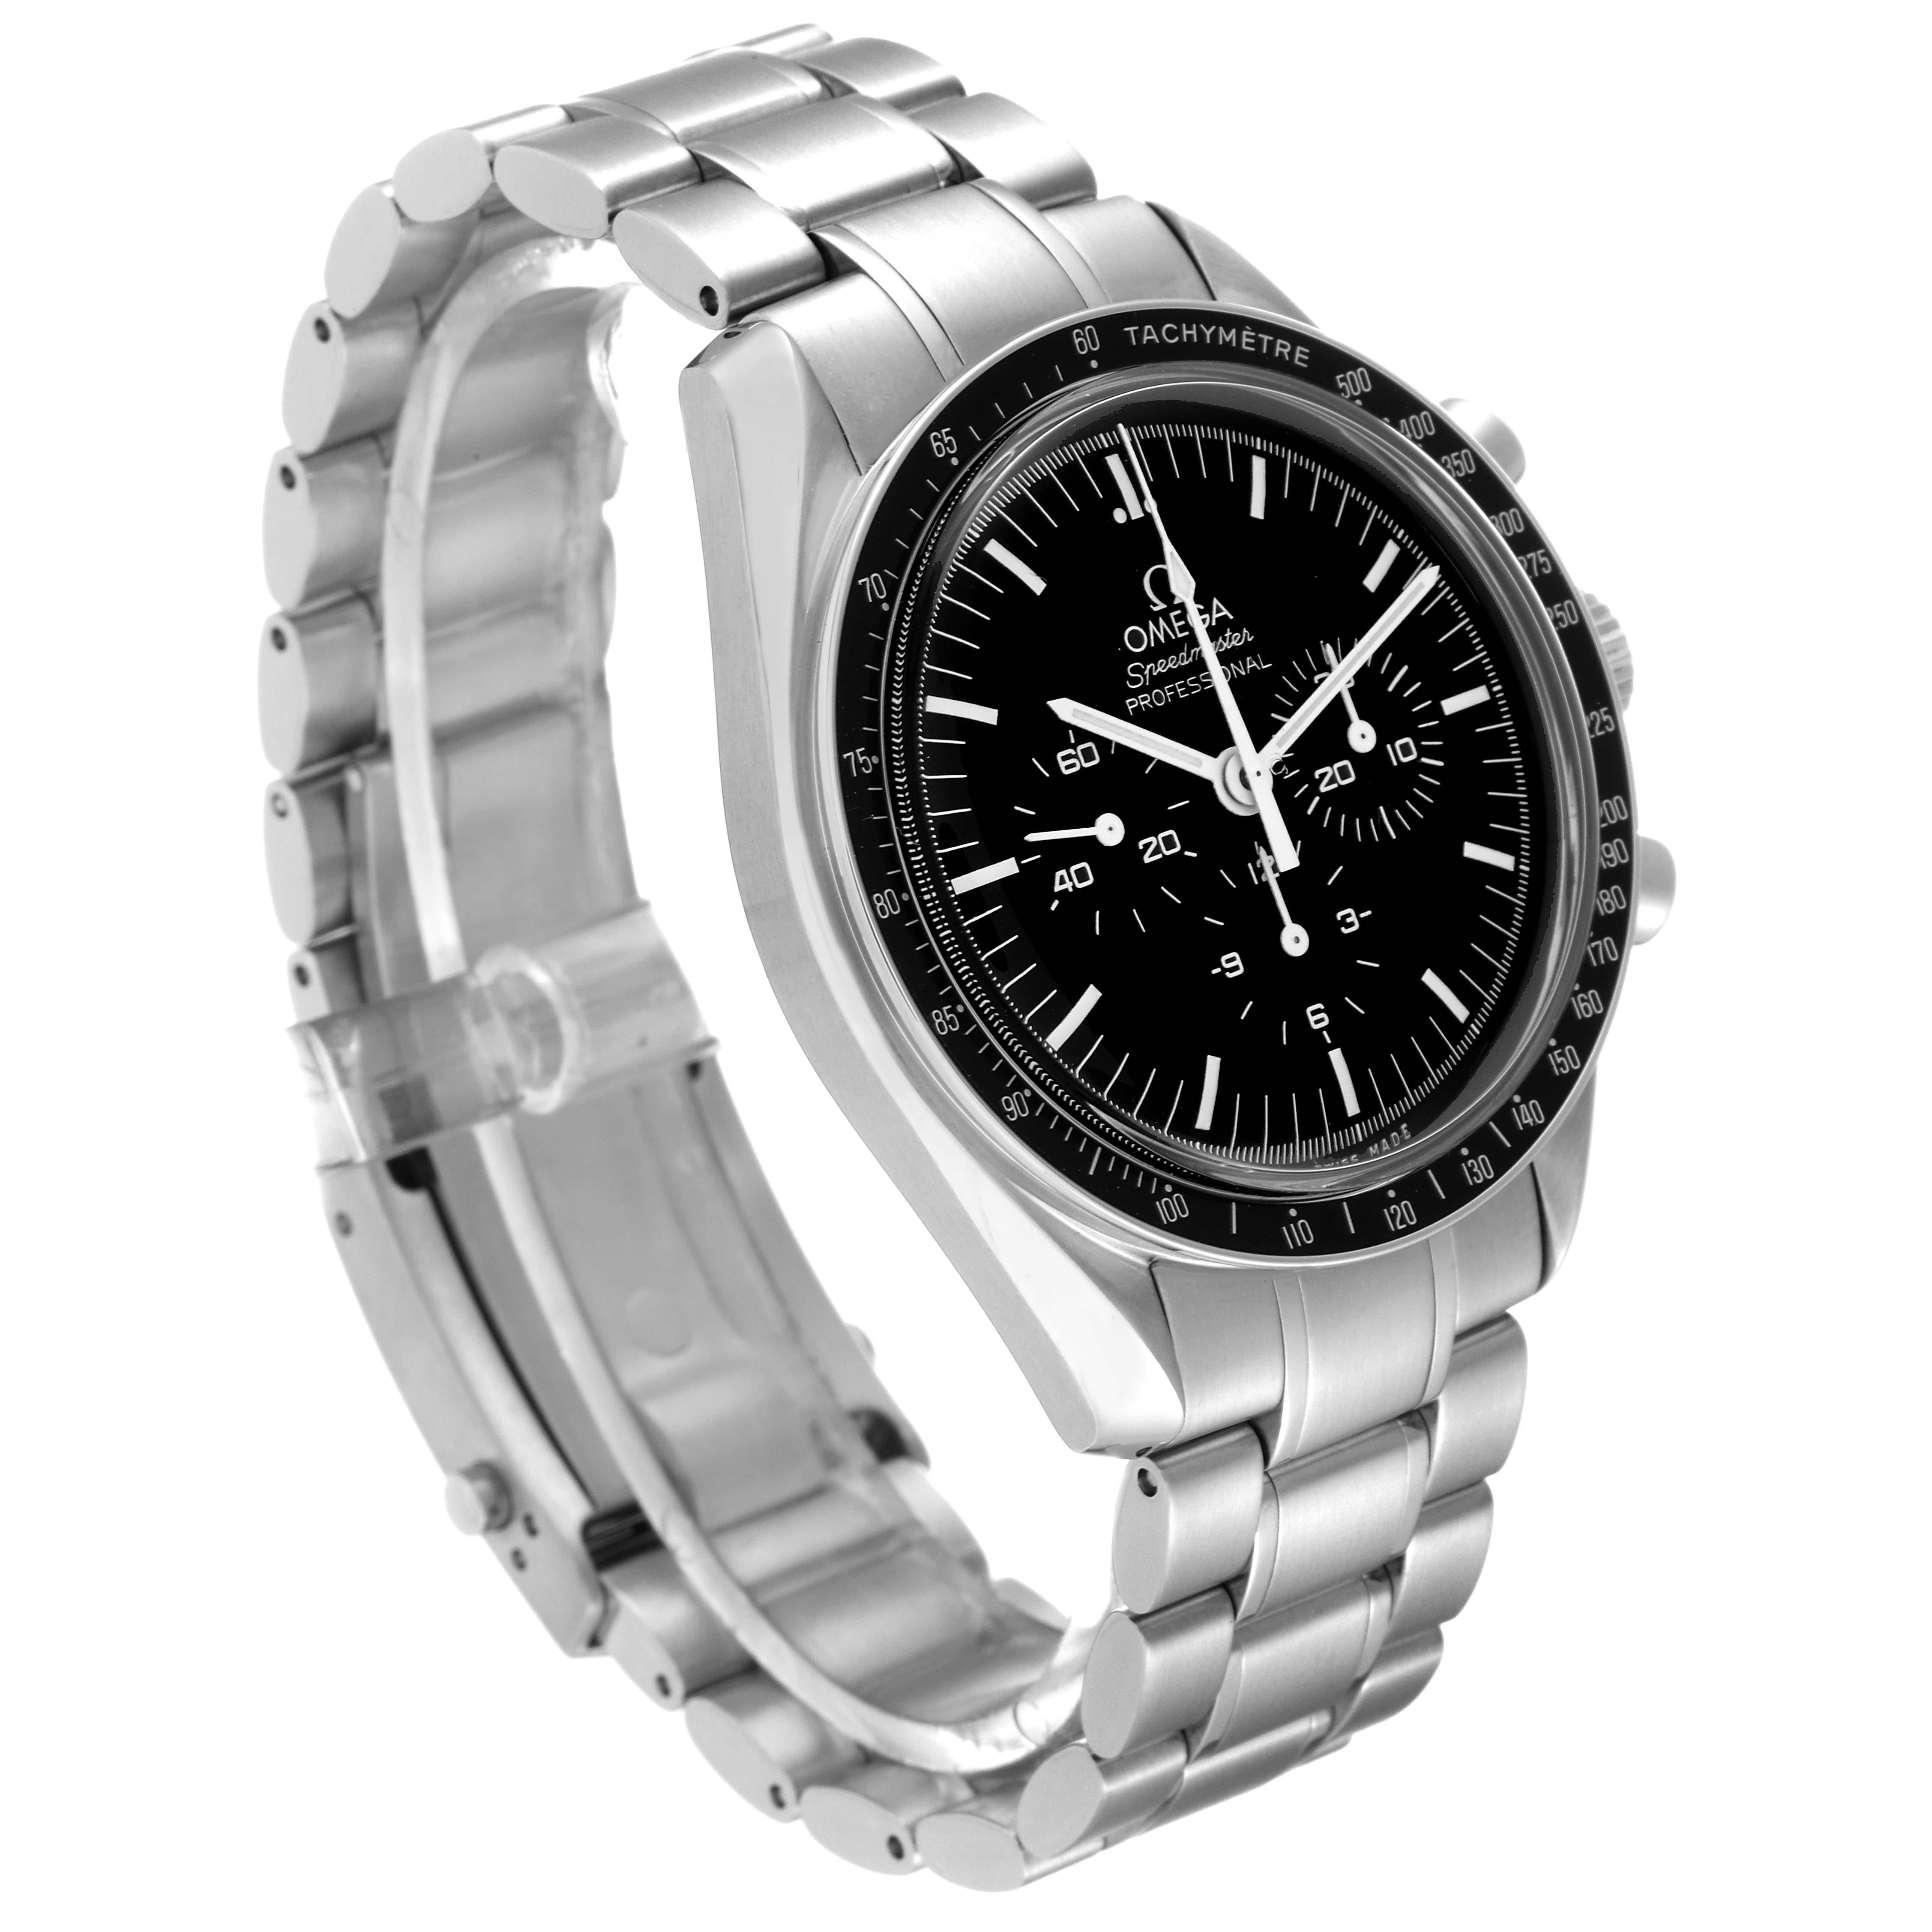 Omega Speedmaster MoonWatch Chronograph Steel Mens Watch 3570.50.00 Box Card. Manual winding chronograph movement. Stainless steel round case 42.0 mm in diameter. Stainless steel bezel with tachymetre function. Hesalite acrylic crystal. Black dial